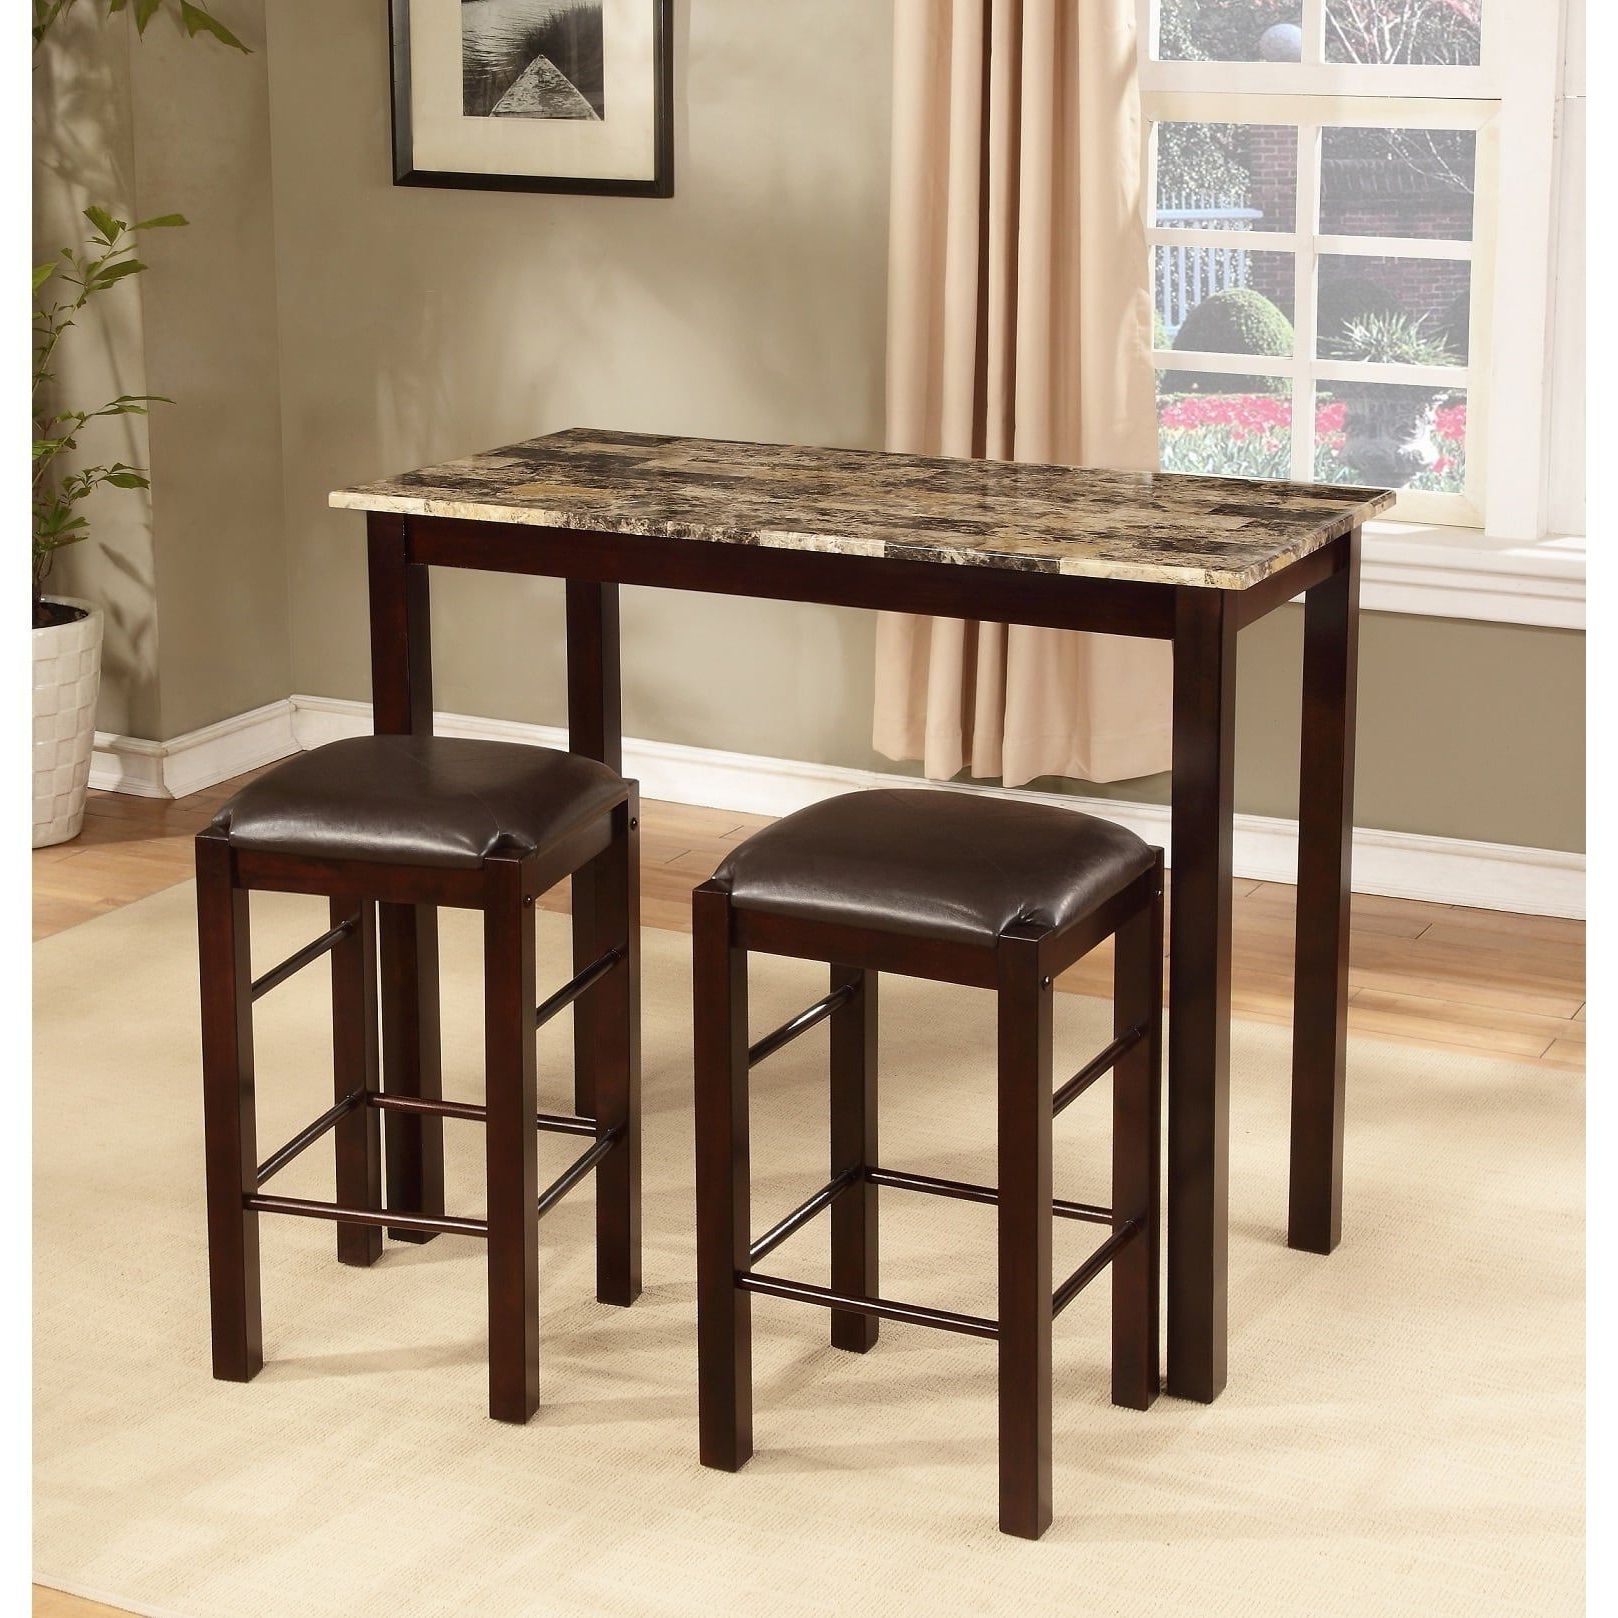 Tenney 3 Piece Counter Height Dining Sets In Most Current Copper Grove Luther 3 Piece Espresso Counter Height Table And Chair (View 8 of 25)